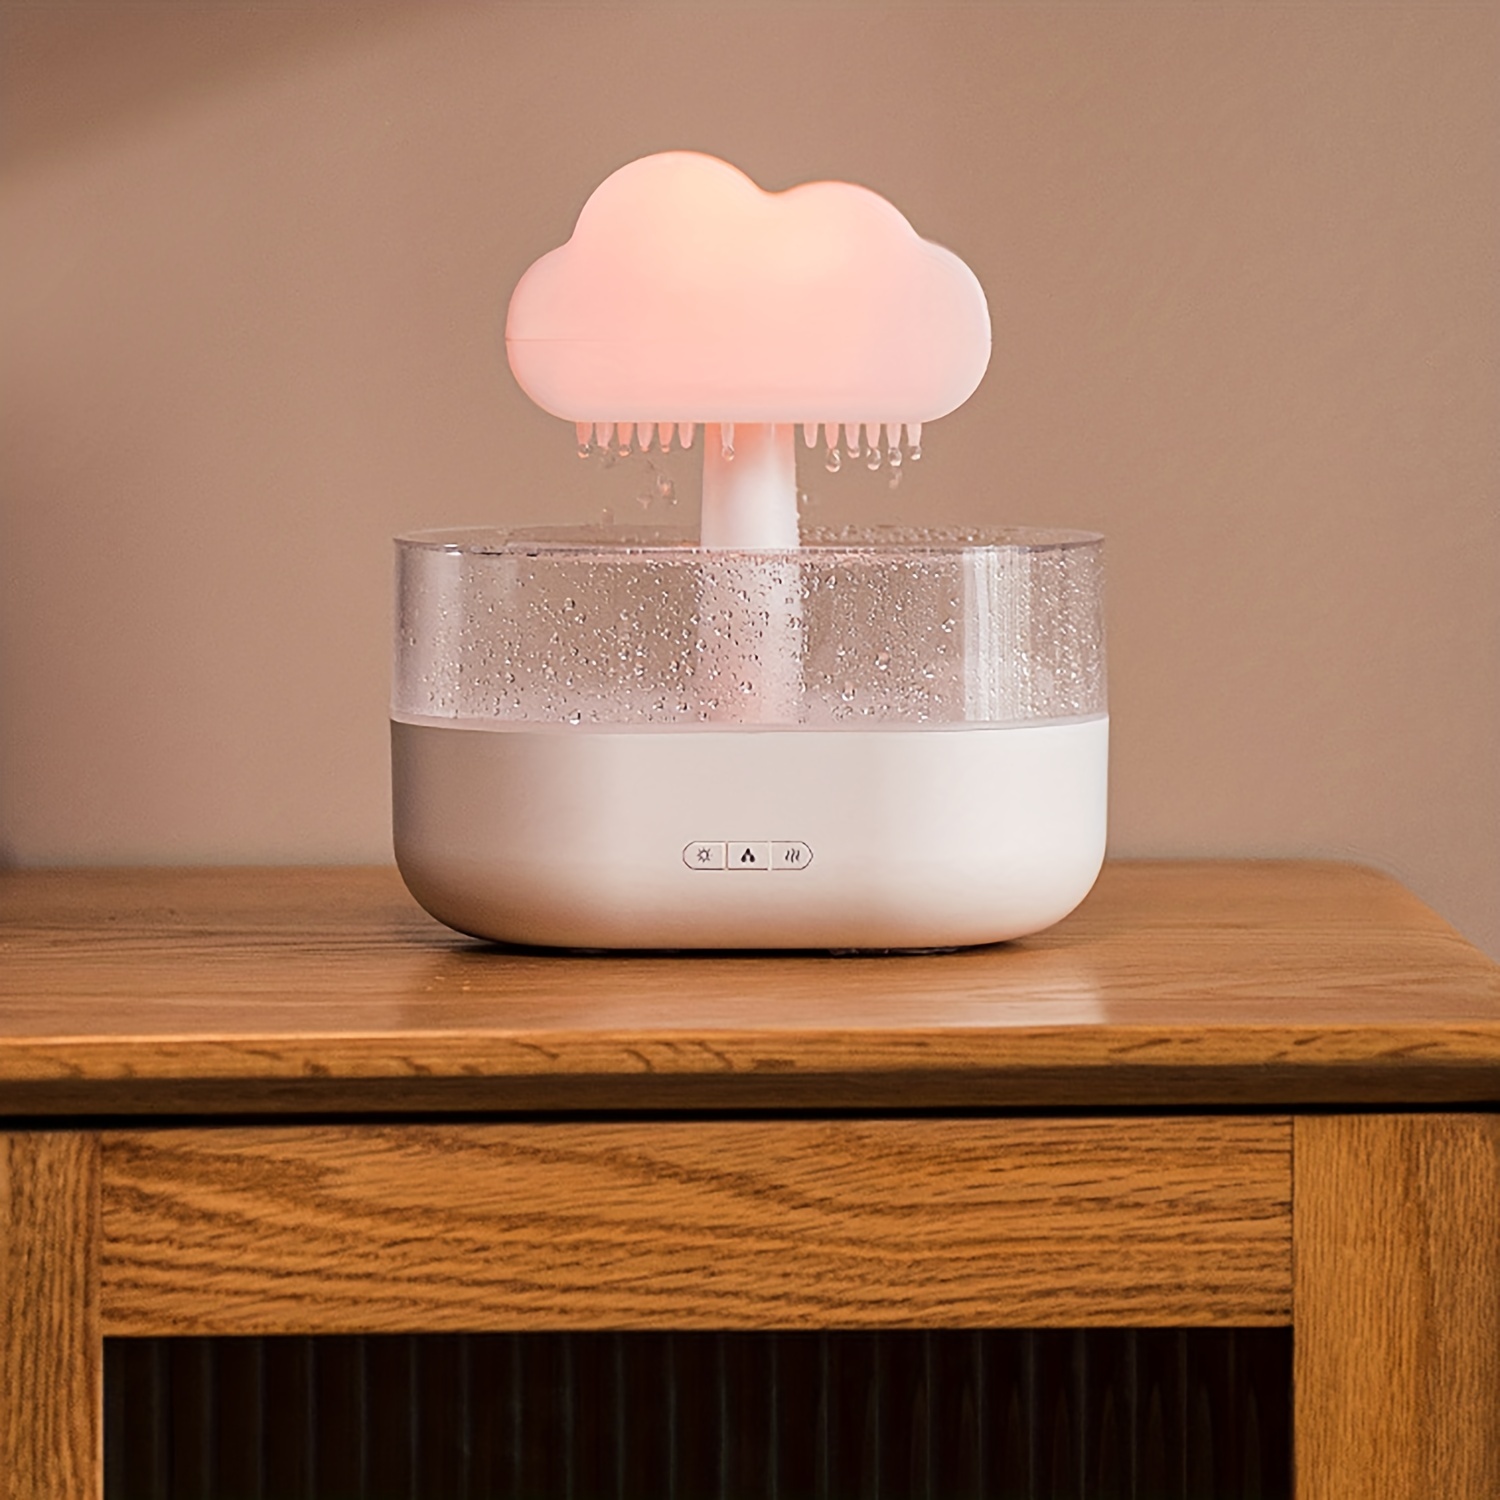 Rain Cloud Humidifier Night Light, Cloud Diffuser With Rain 7 Changing  Colors, Aromatherapy Diffuser Desk Fountain Bedside For Sleeping Relaxing  Mood